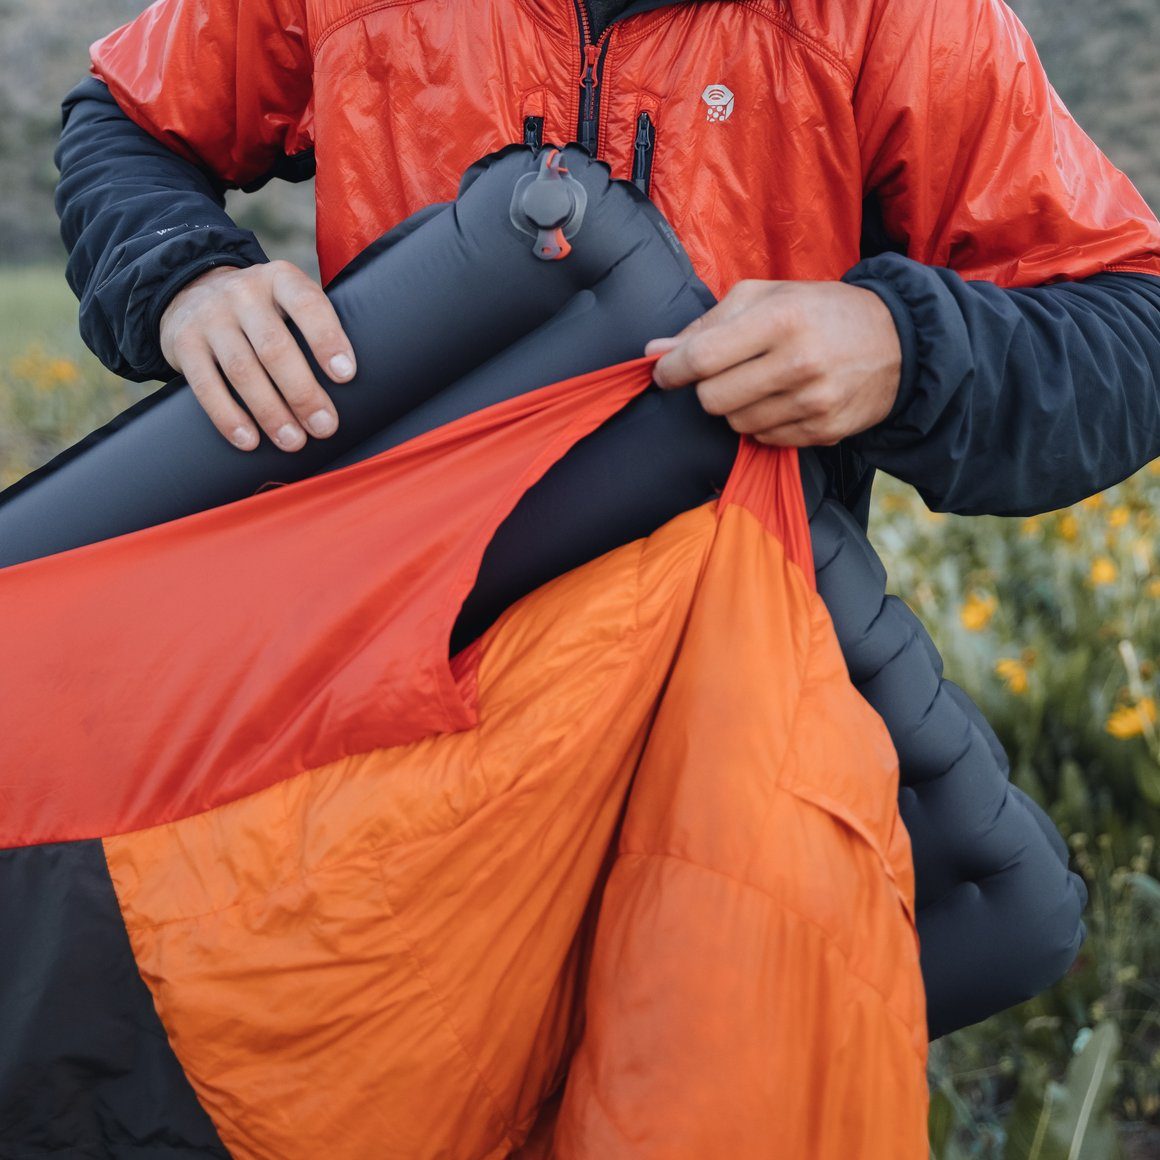 Our Light Mattress is ideal for those that backpack often. It is both lighter and more compact than the Flex Mattress. Our Light Mattress is soft, silent and warm with 180g of fully baffled insulation.